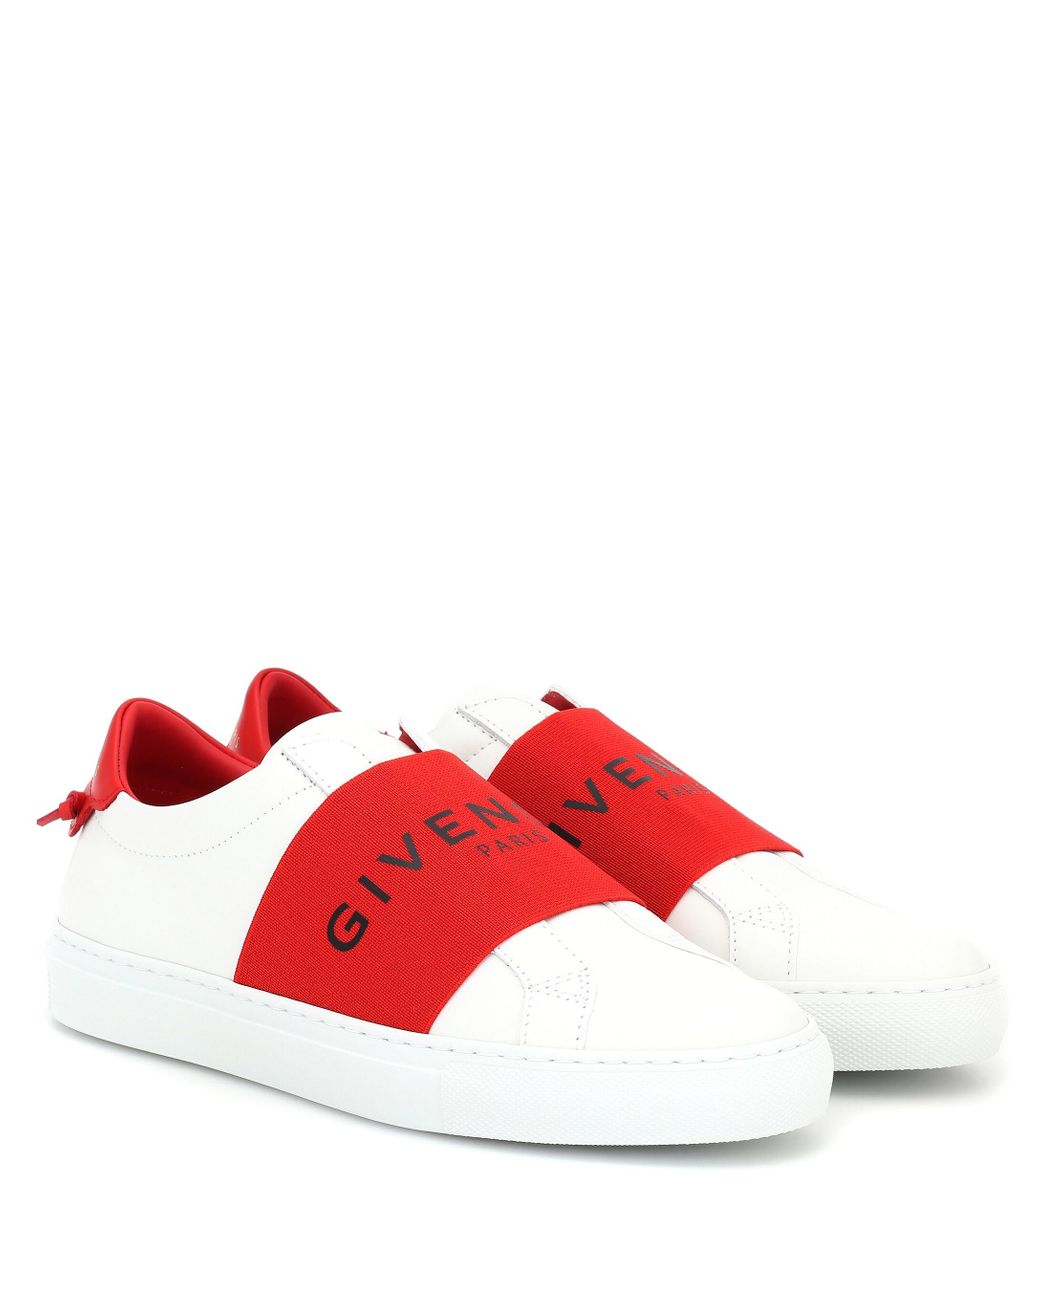 Givenchy Leather Urban Street Sneakers in White,Red (Red) - Save 27% - Lyst